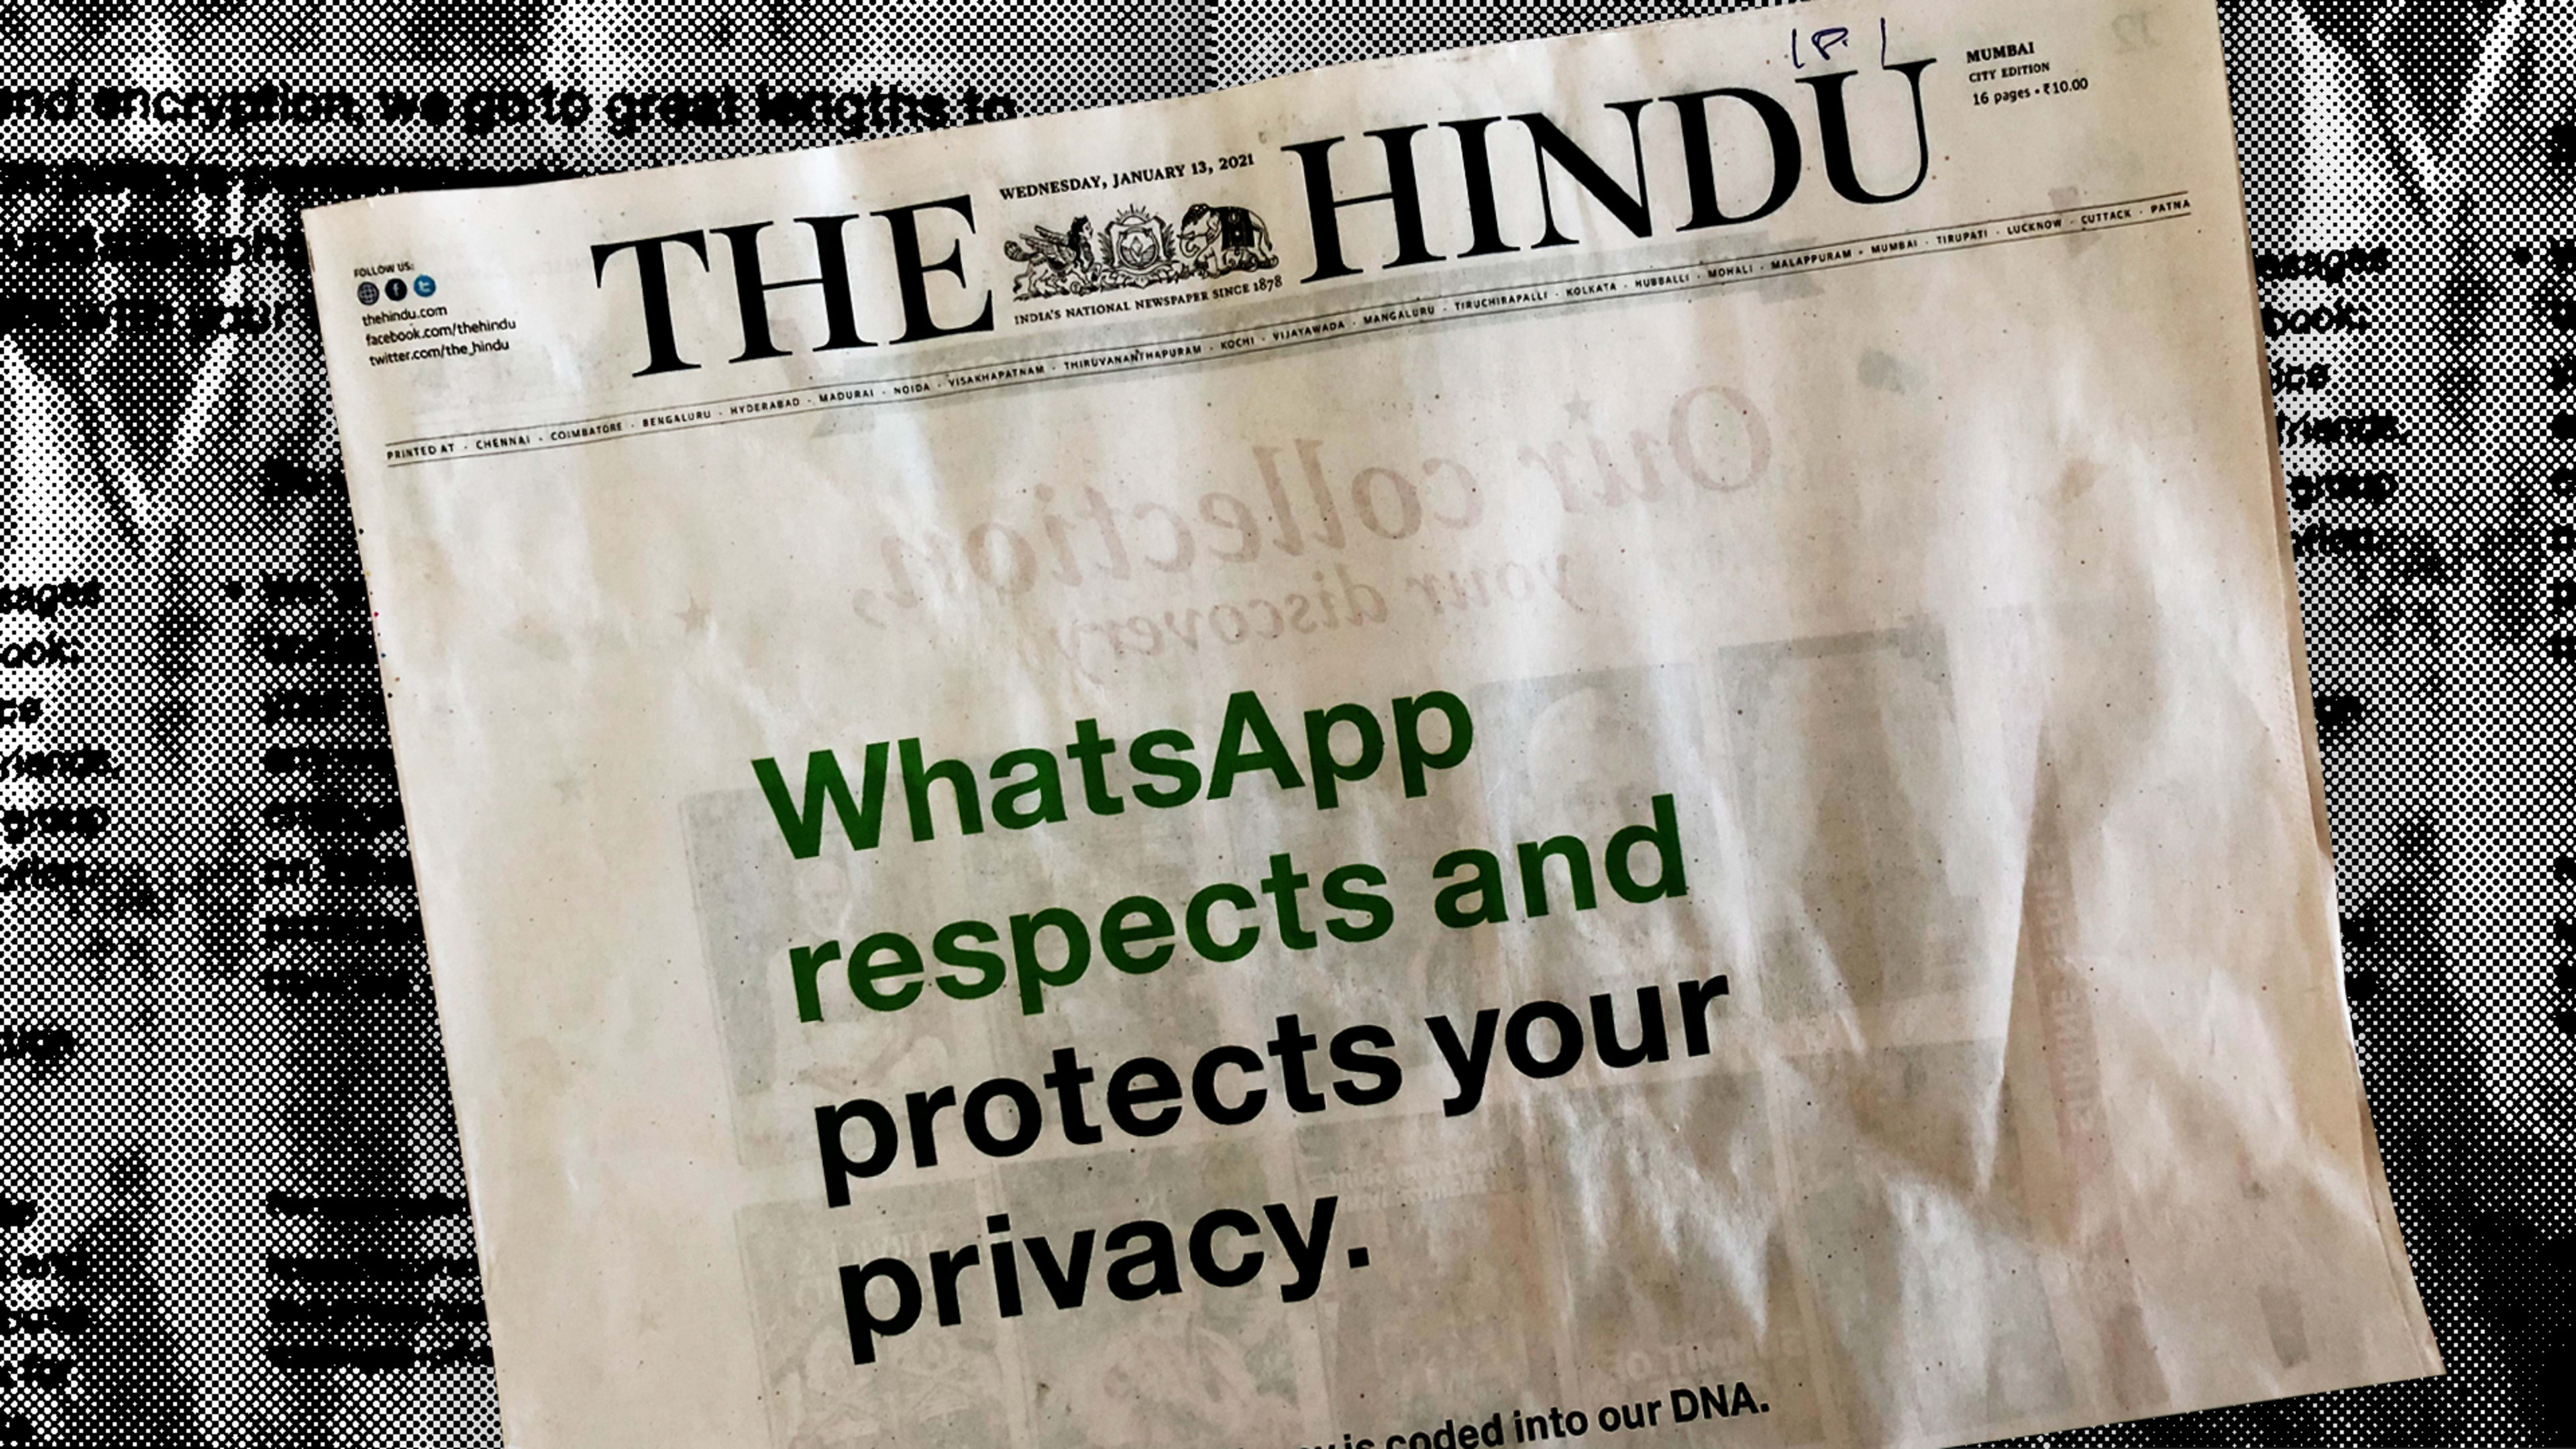 Facebook responds to WhatsApp privacy outrage with front page ads in Indian newspapers